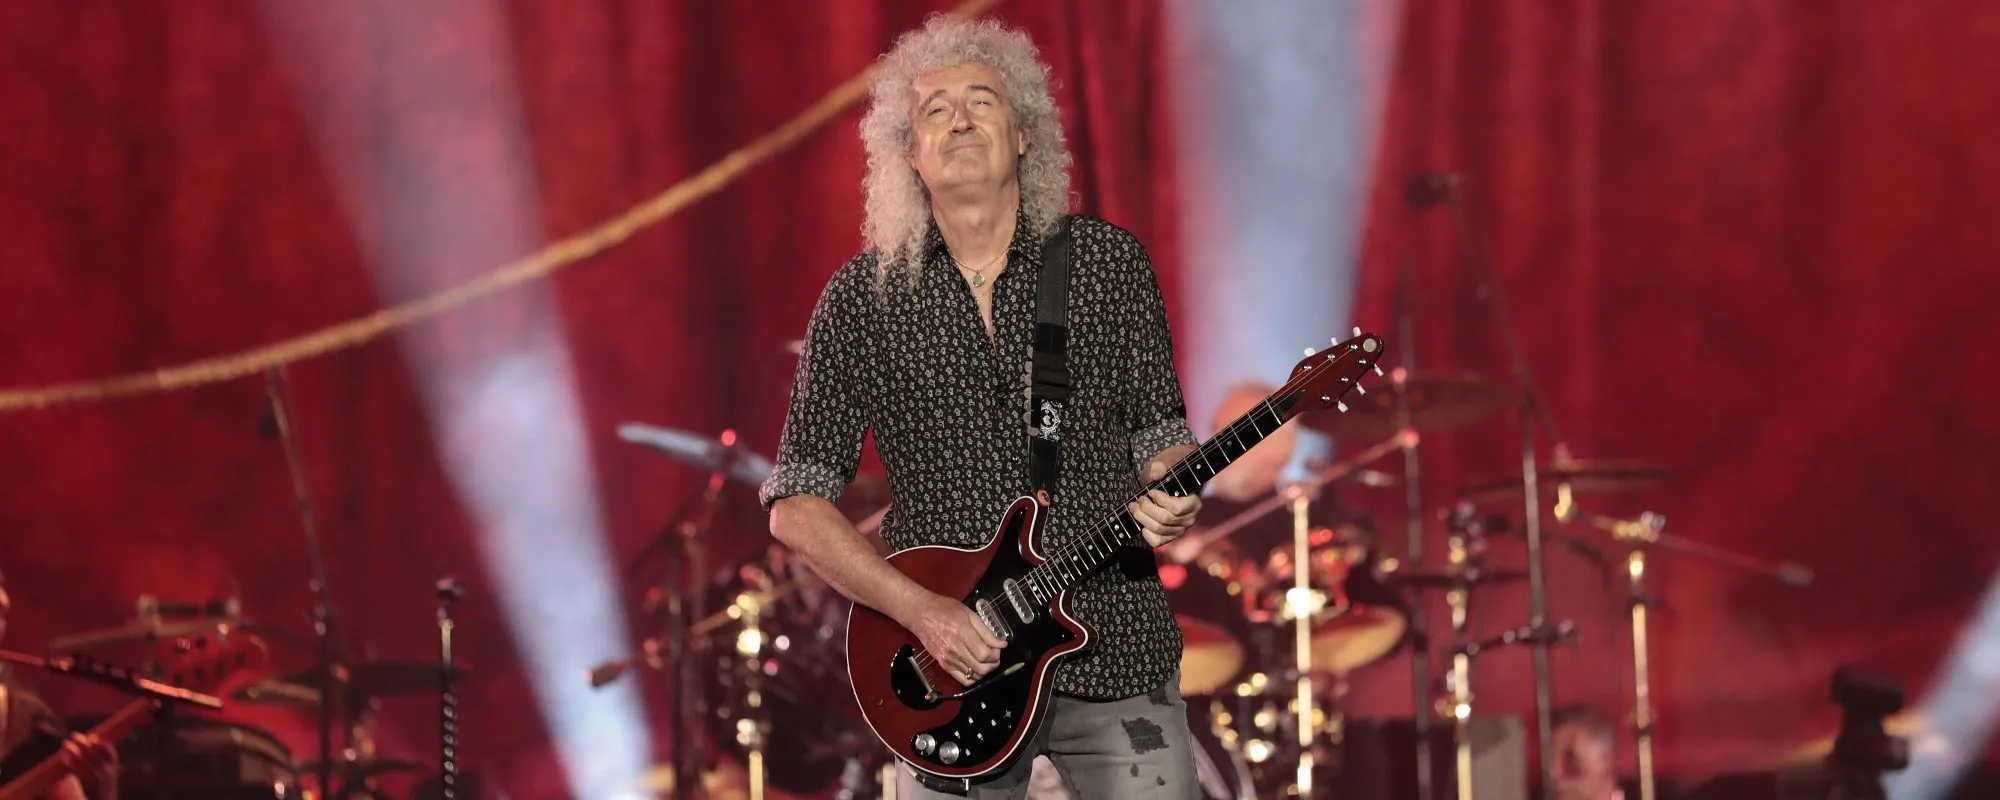 Queen’s Brian May Admits He “Never Liked” the Final Mix of His Band’s David Bowie Collab “Under Pressure”